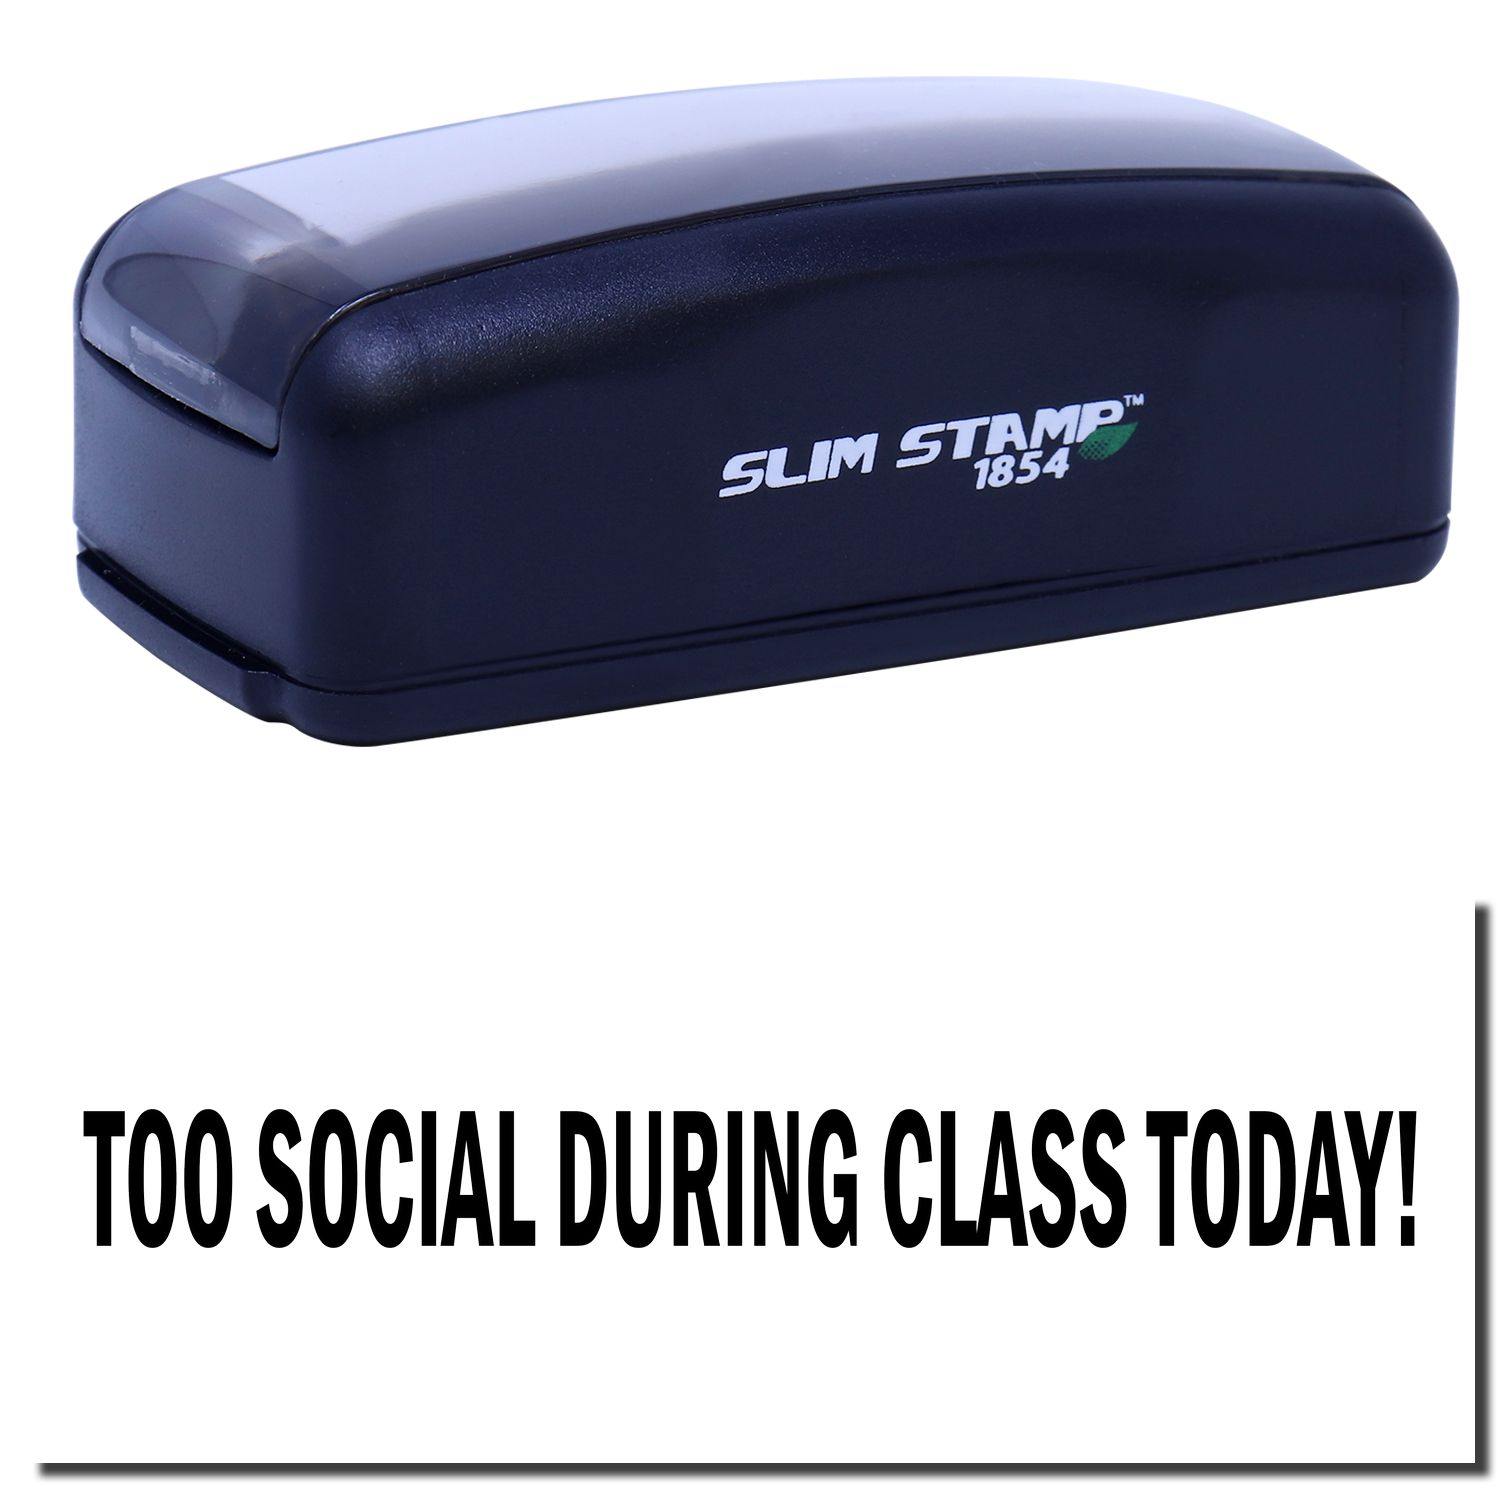 A stock office pre-inked stamp with a stamped image showing how the text "TOO SOCIAL DURING CLASS TODAY!" in a large font is displayed after stamping.